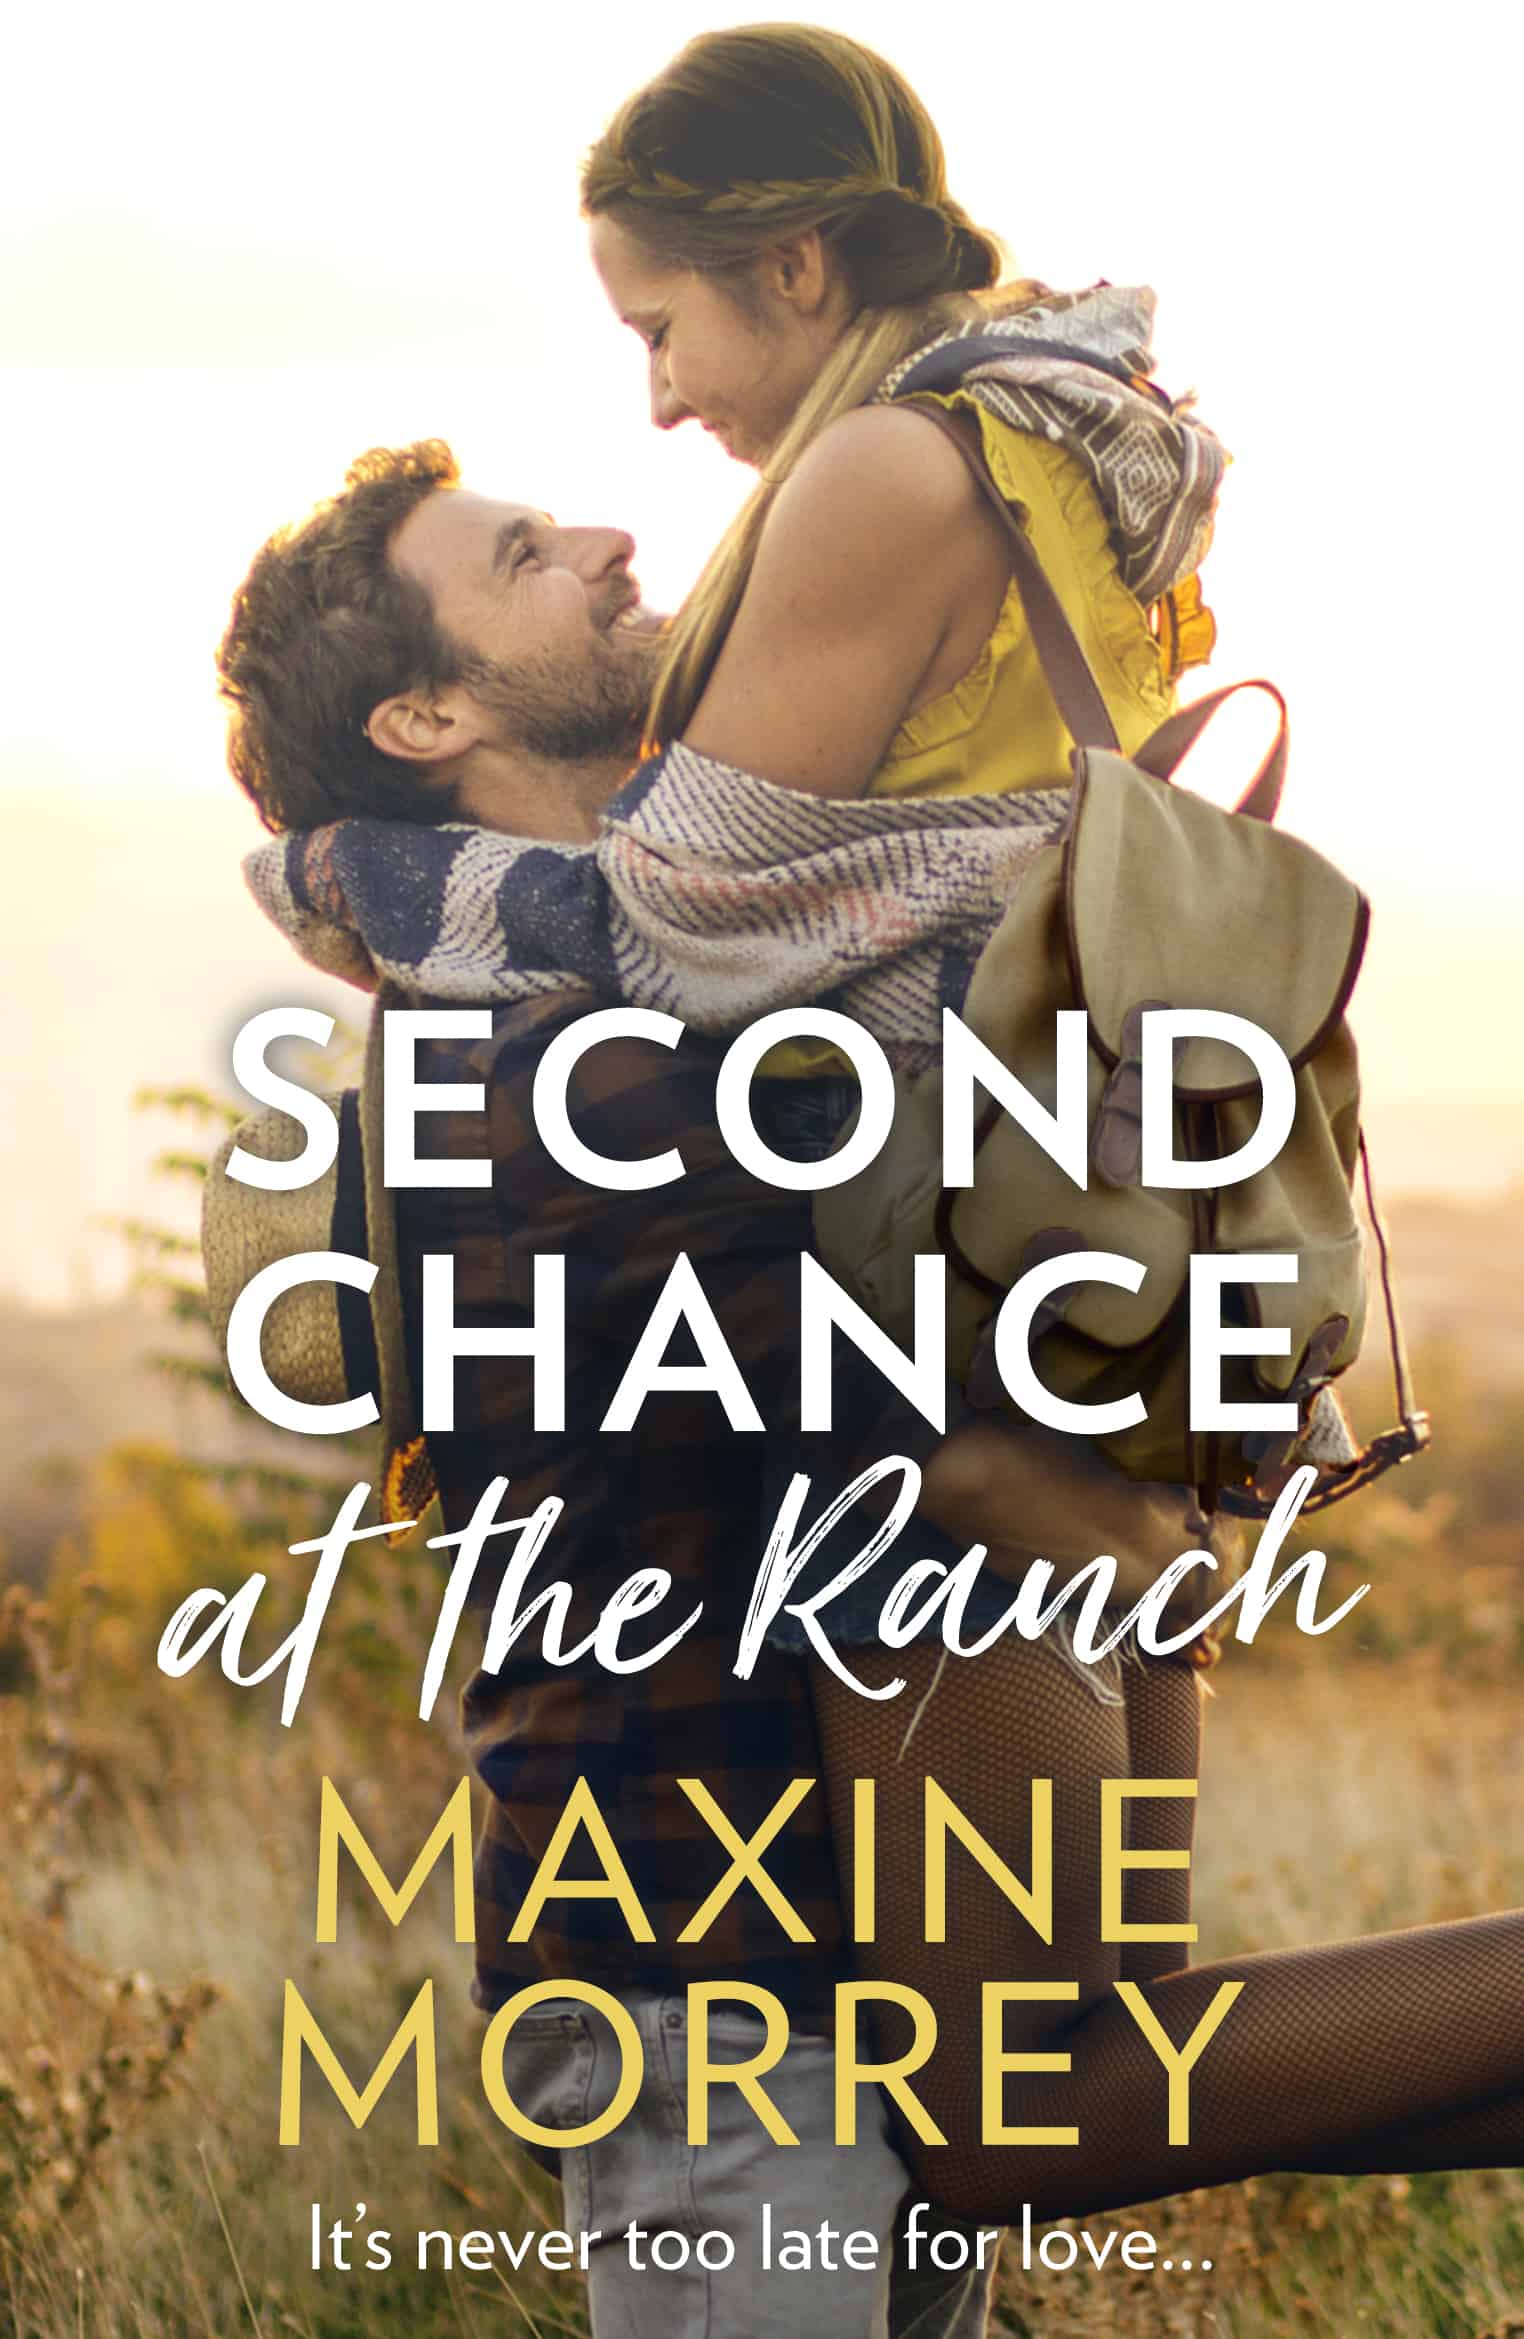 Second Chance at the Ranch by Maxine Morrey